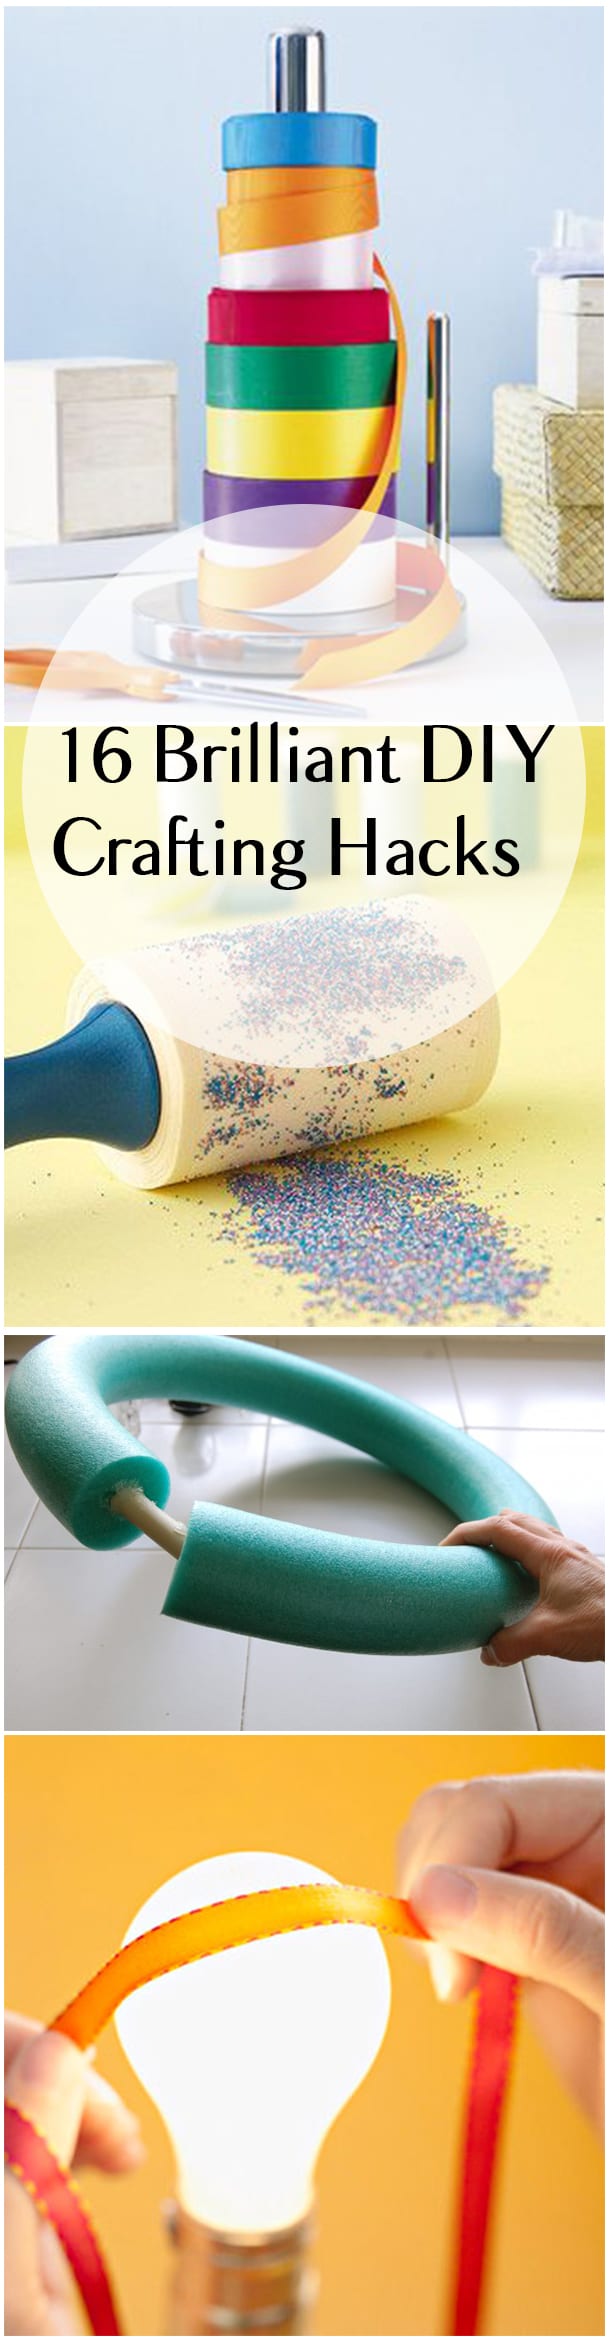 Crafting hacks, DIY crafting, crafting, crafting tips and tricks, DIY tricks, crafting tutorials, easy projects, popular pin, simple projects.